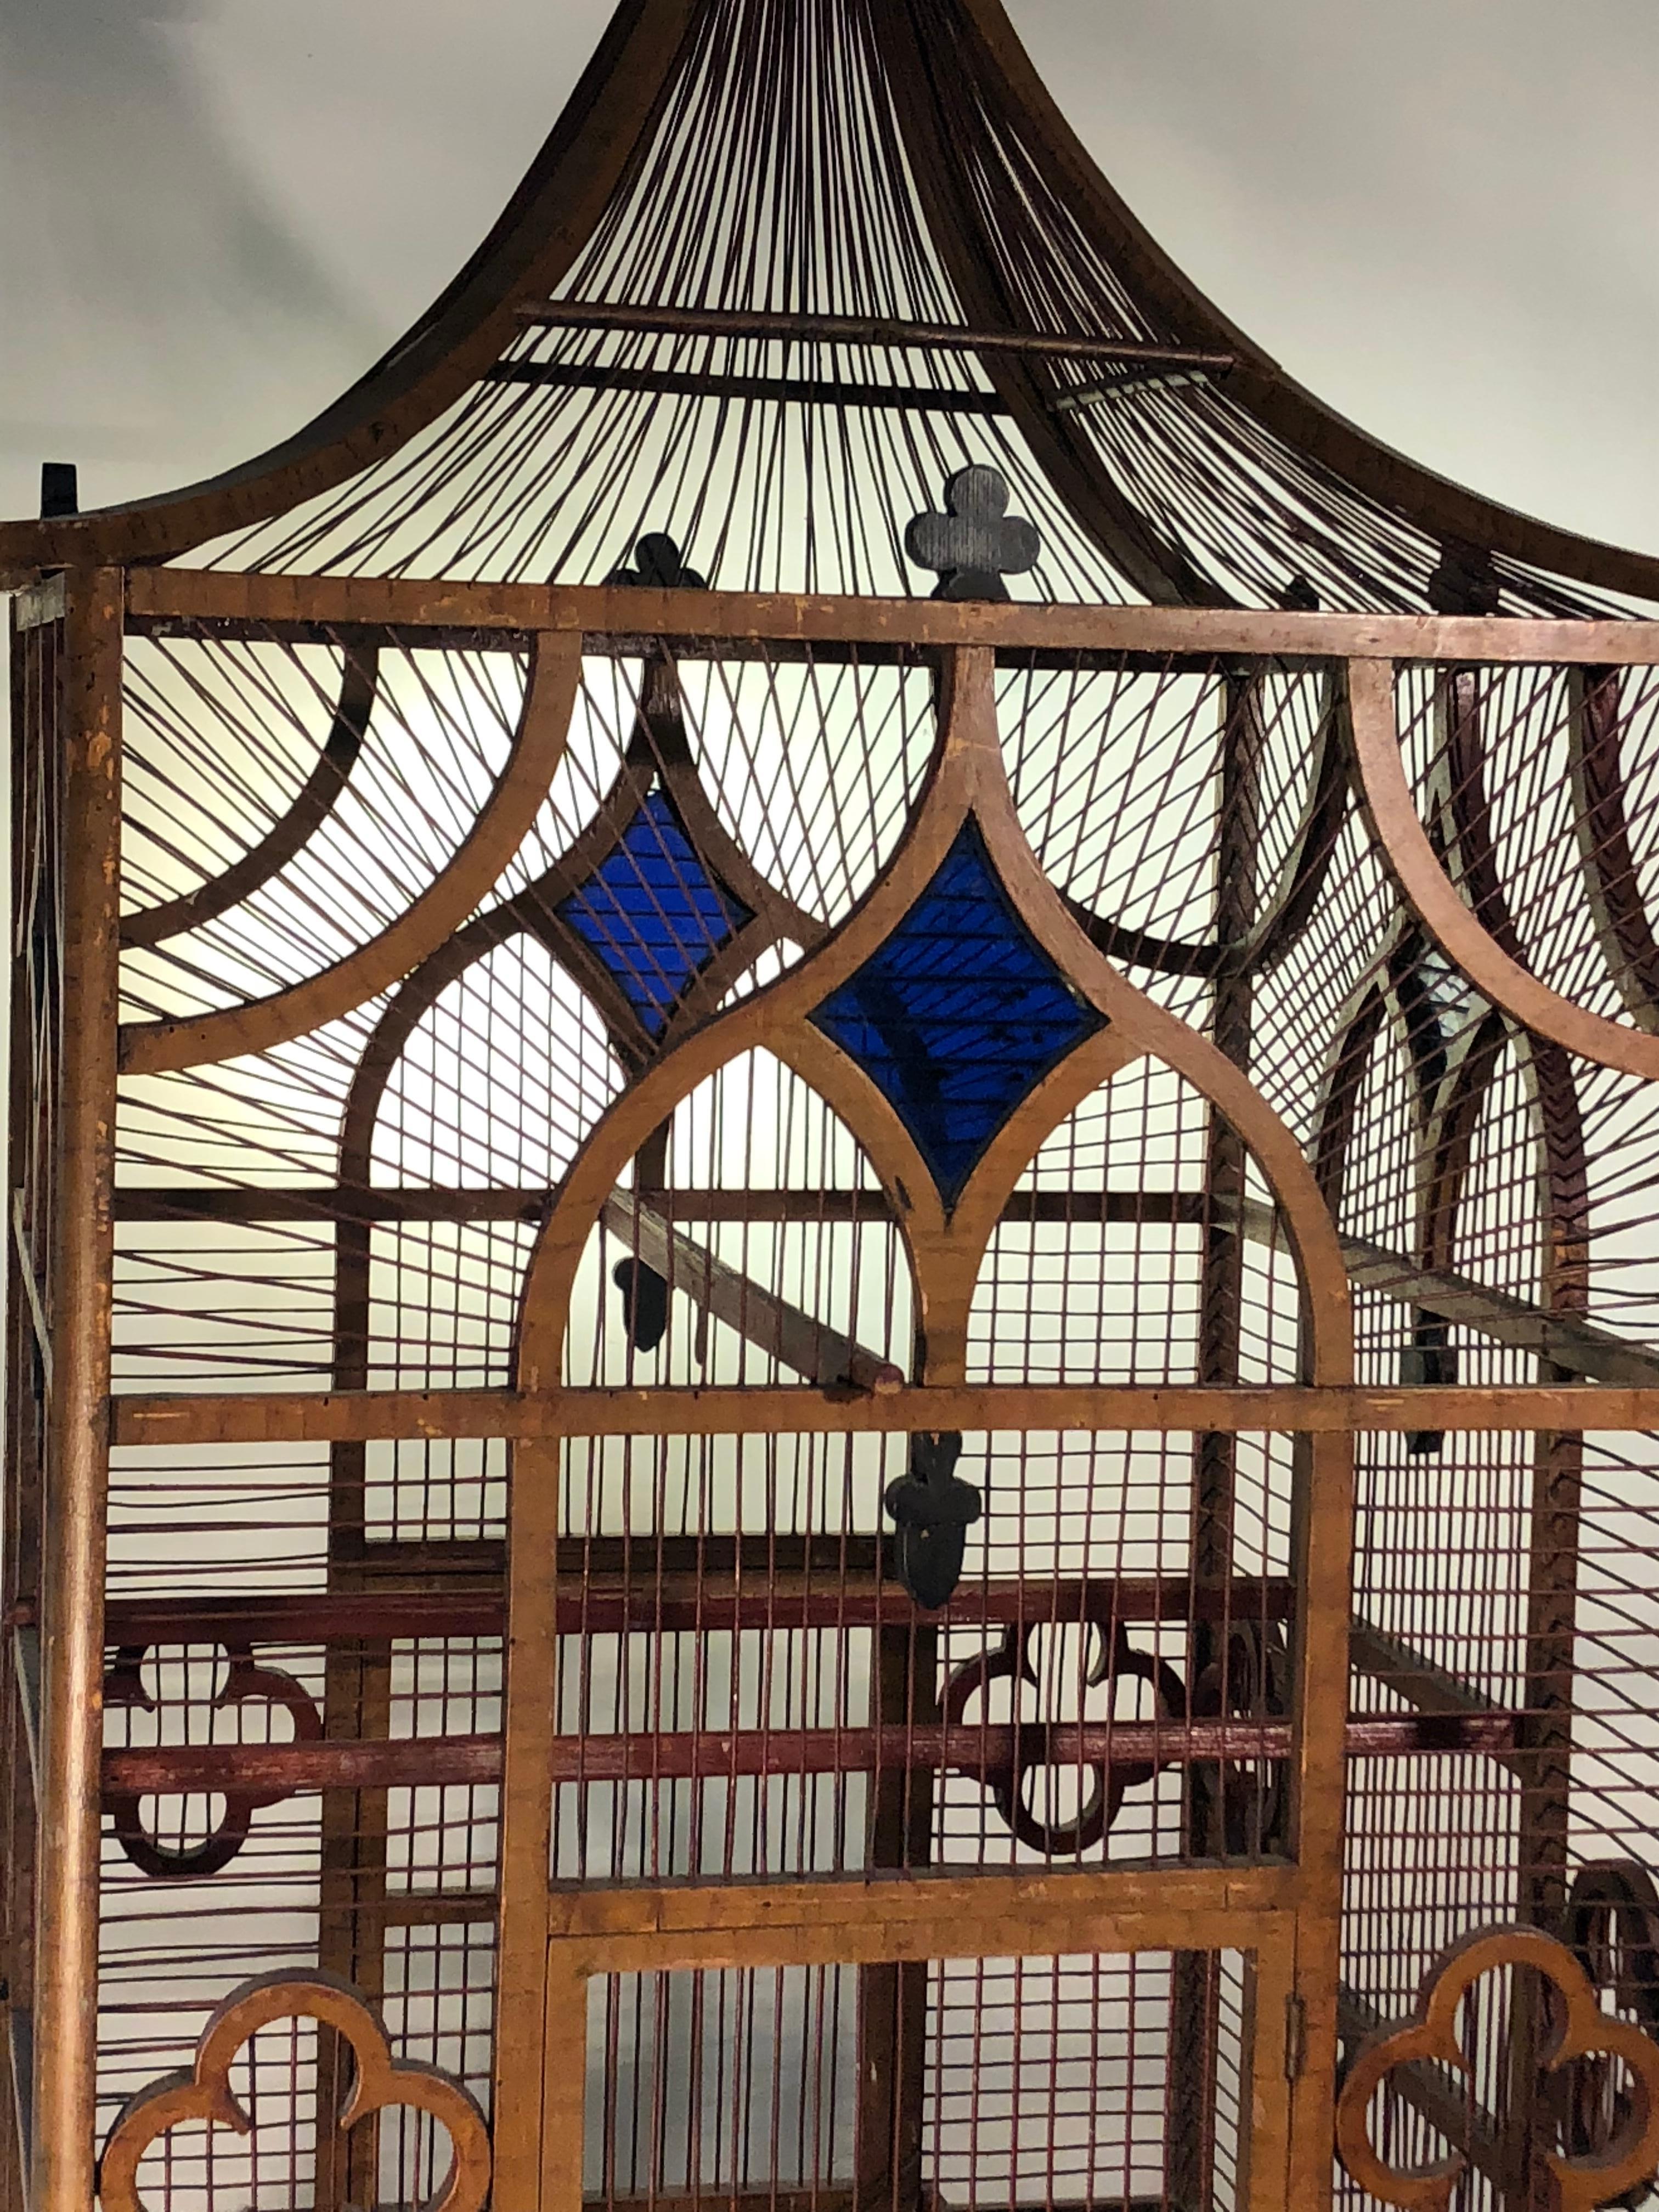 A large Pagoda-form faux-painted wood and wire birdcage, probably English, circa 1870 with carved and ebonized acorns and clovers and inset cobalt blue glass panes. The arched roof has a nicely turned wood finial. Original perches and feeder box.